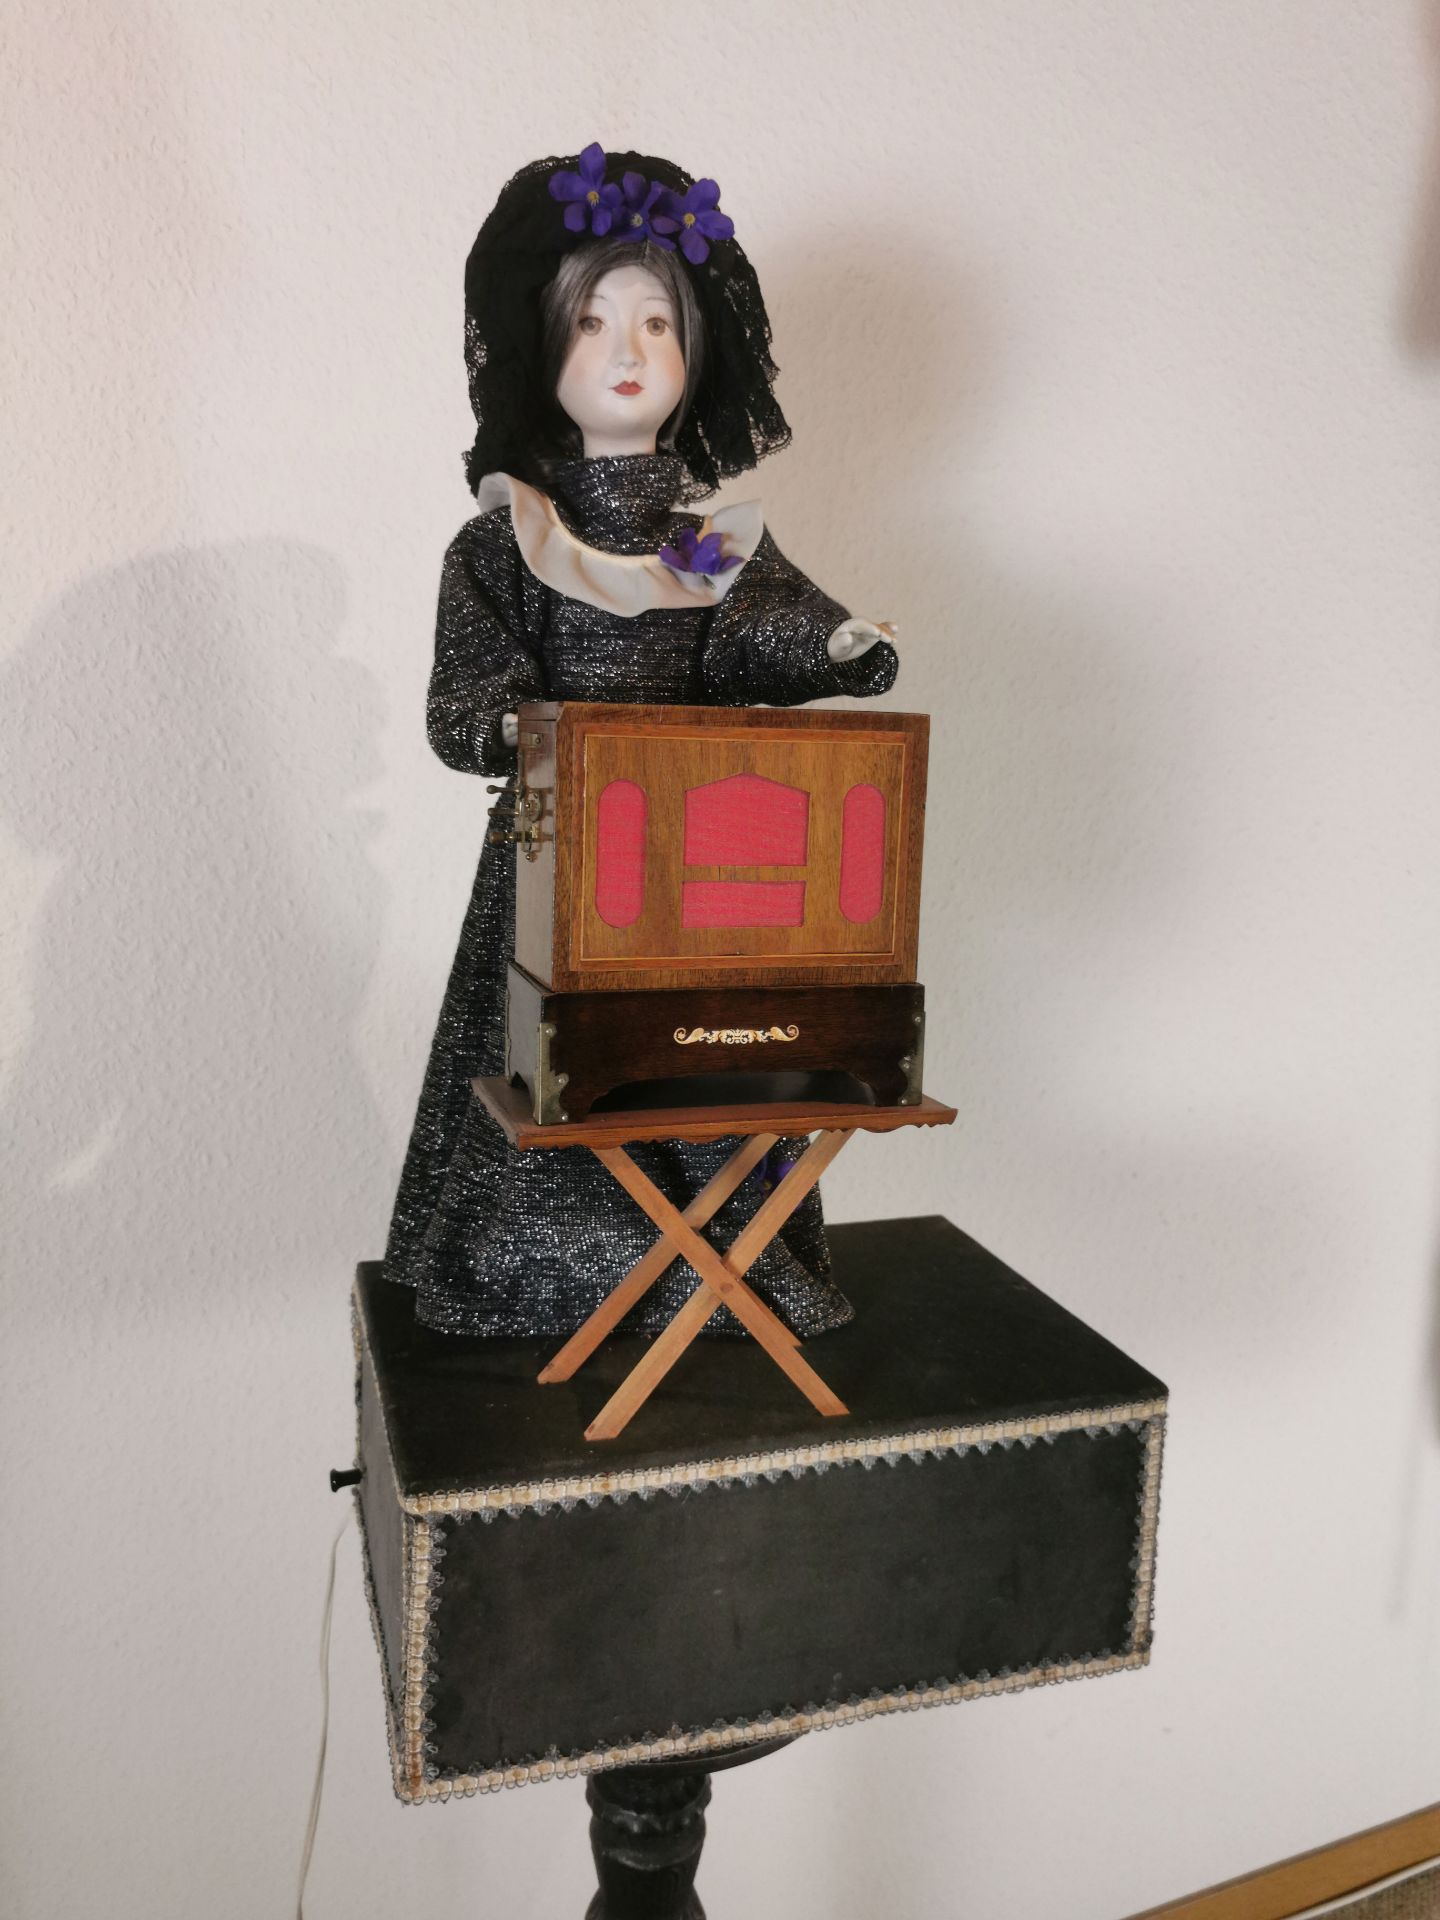 Lady Organ Player Mechatronic Automaton by WT - Image 2 of 9